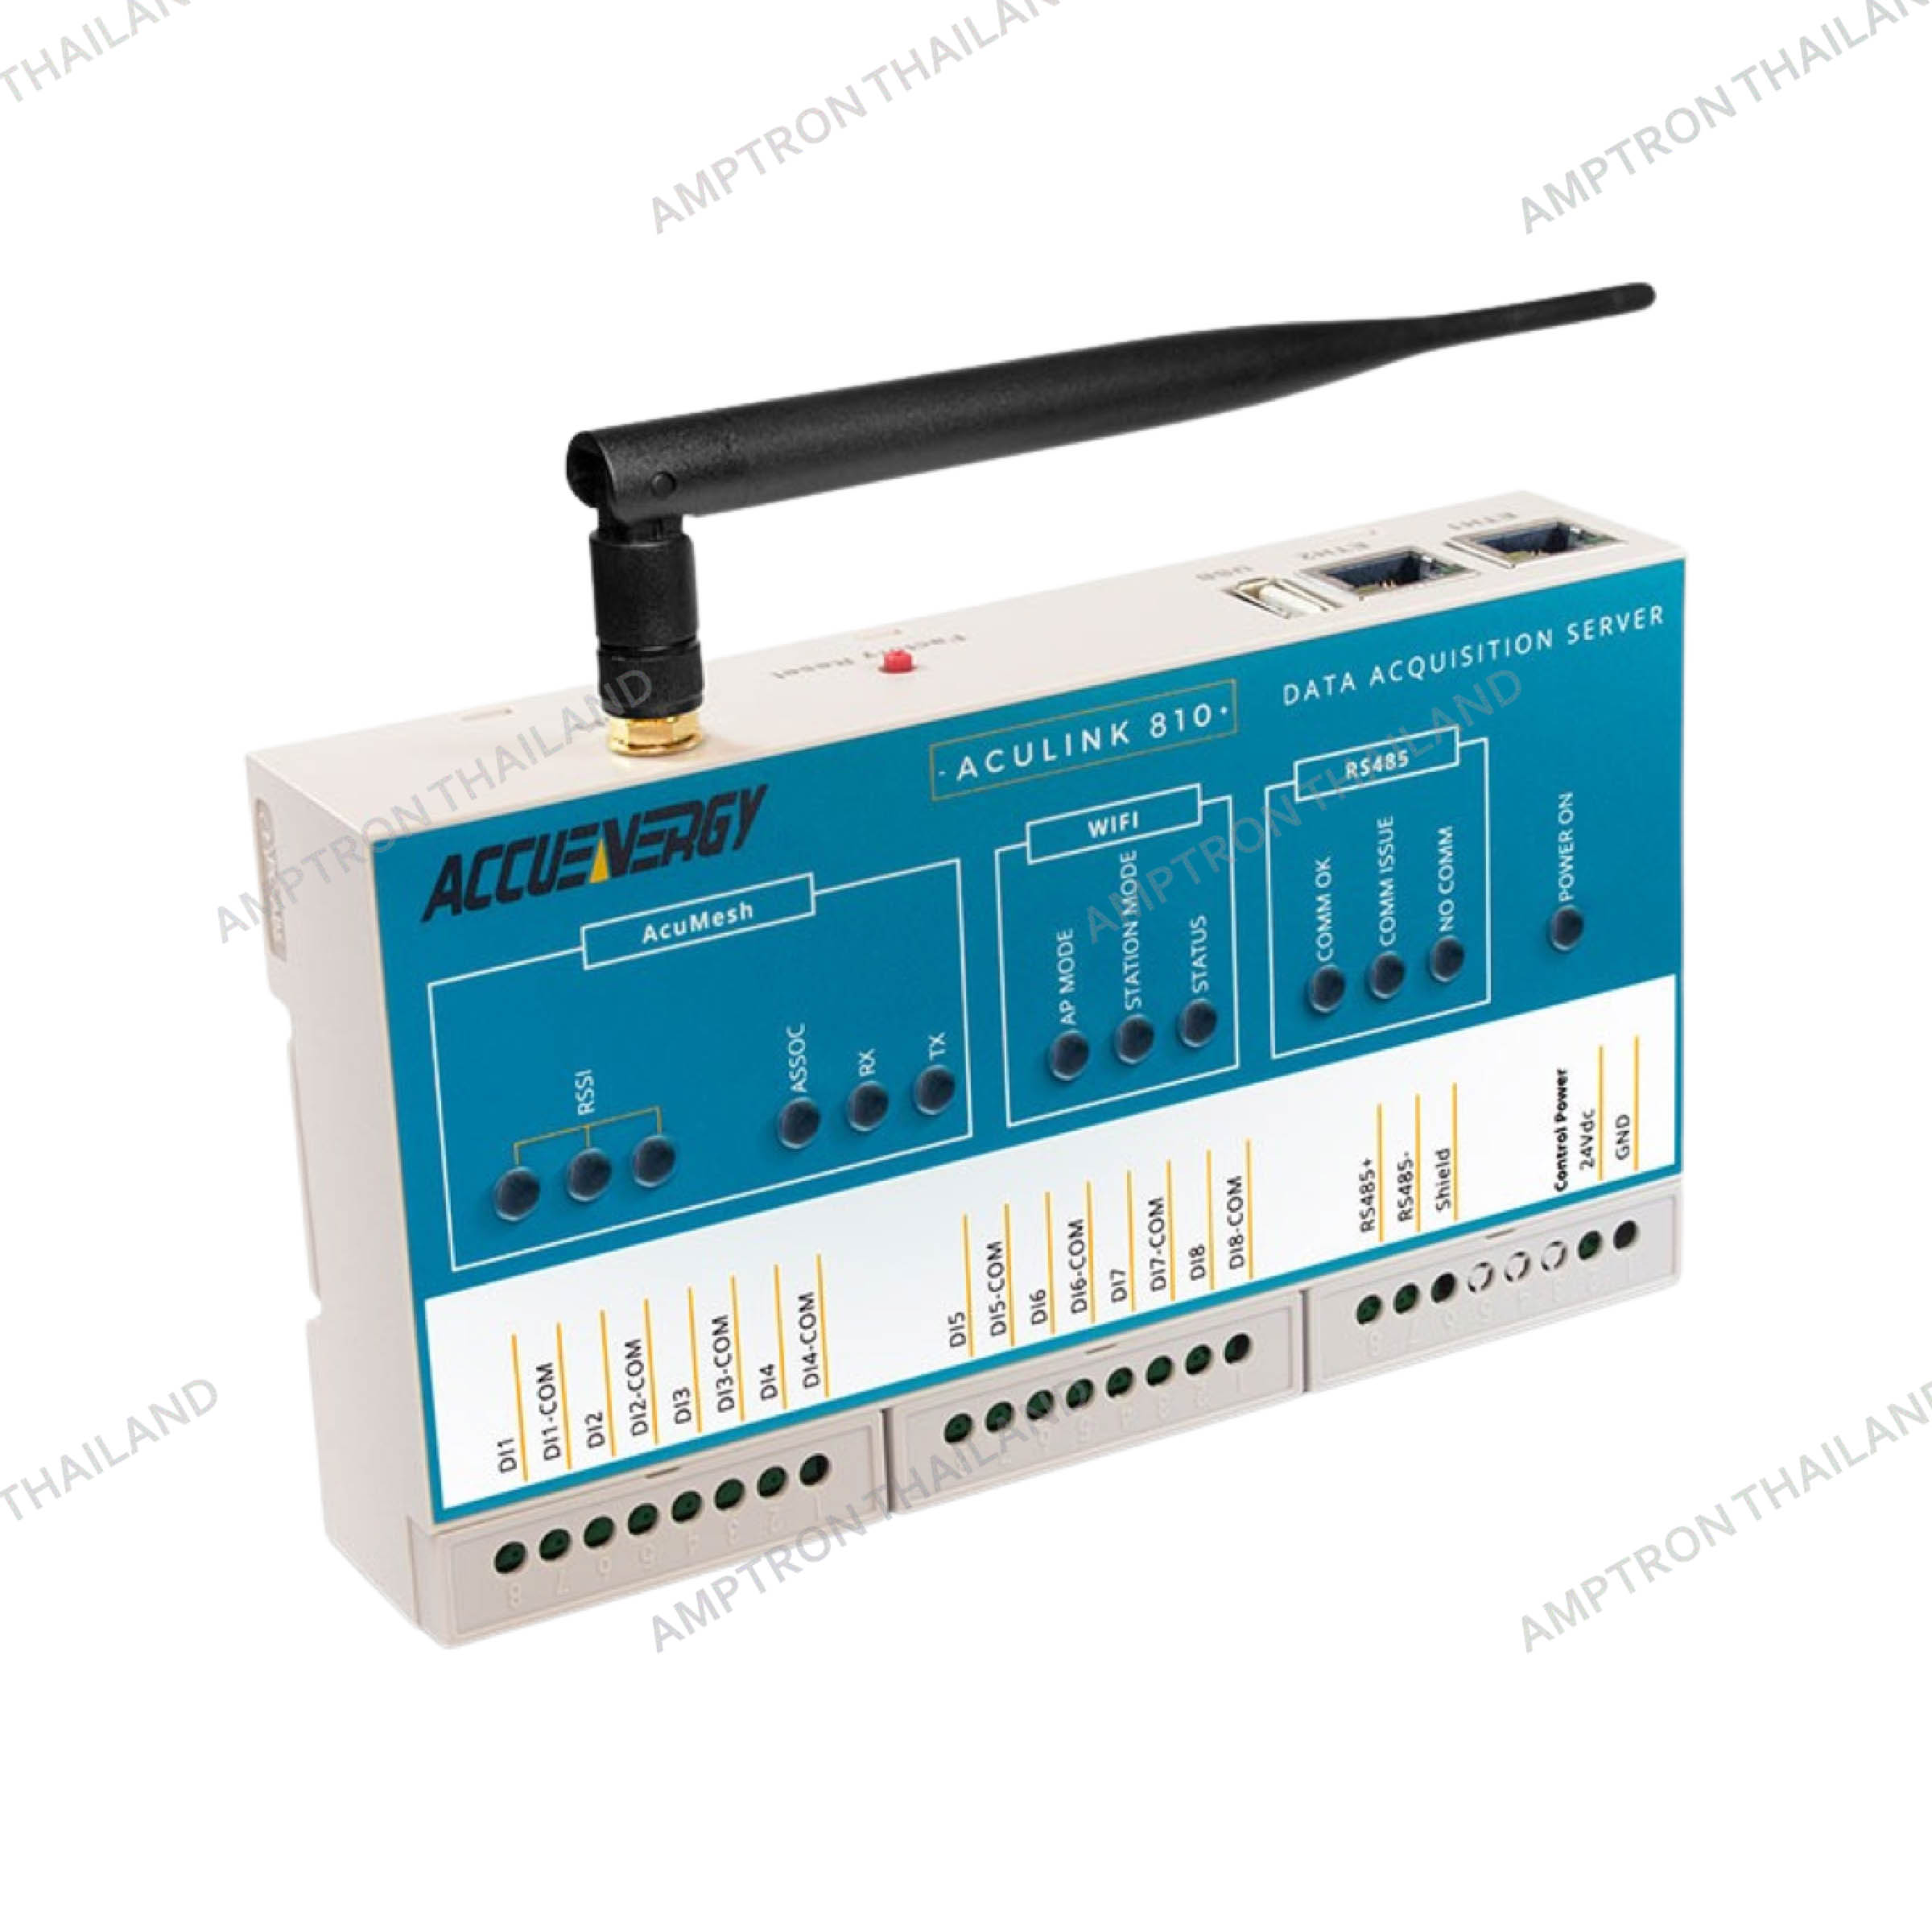 AcuLink 810 Data Acquisition Server